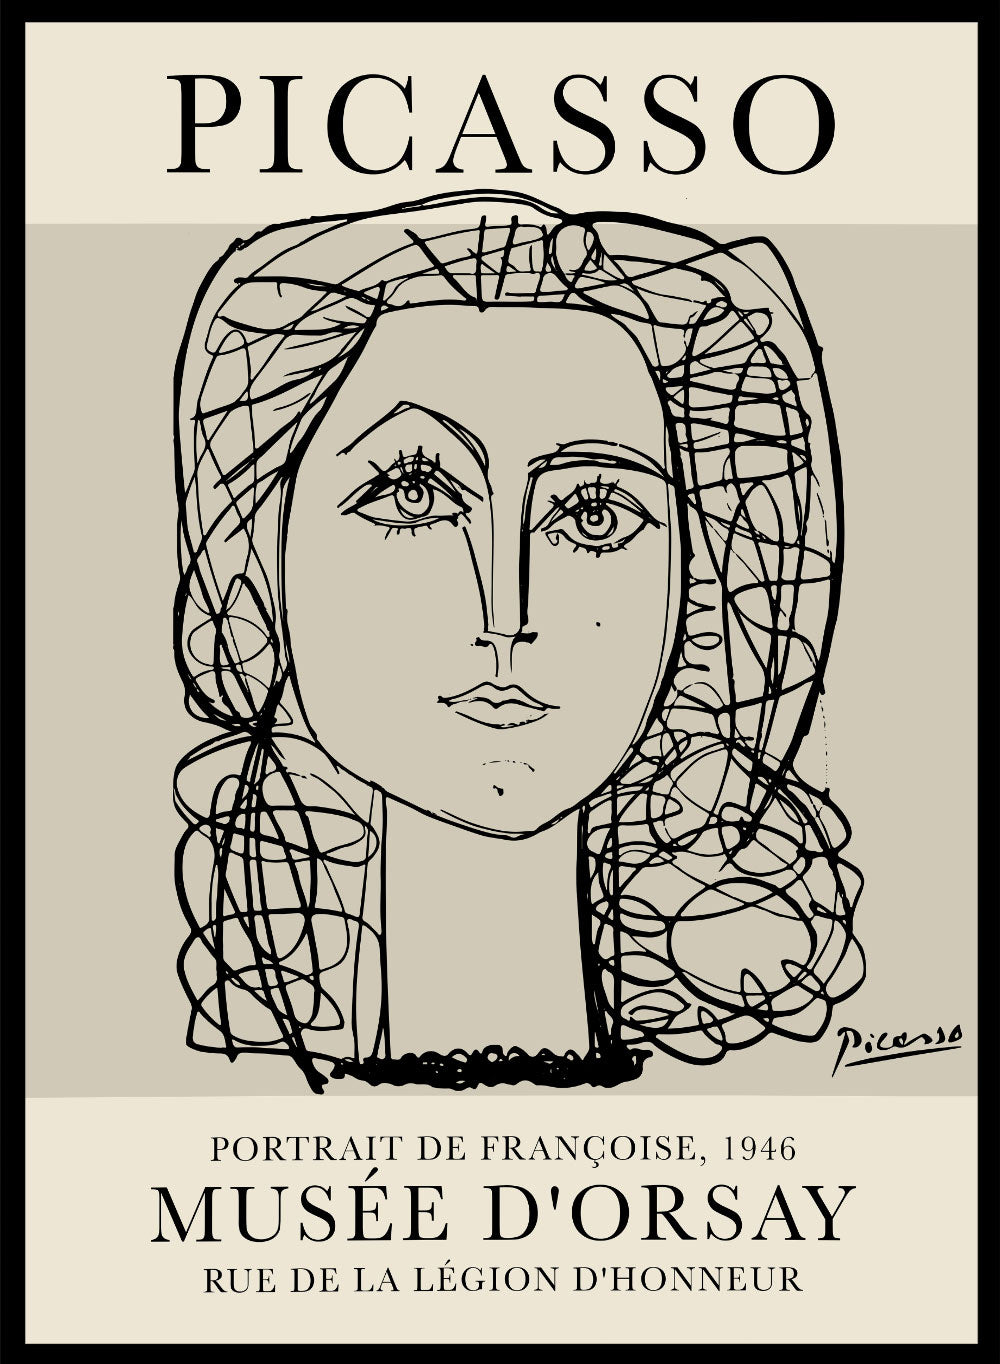 Picasso Line Art, Pablo Picasso Wall Art, Exhibition Poster